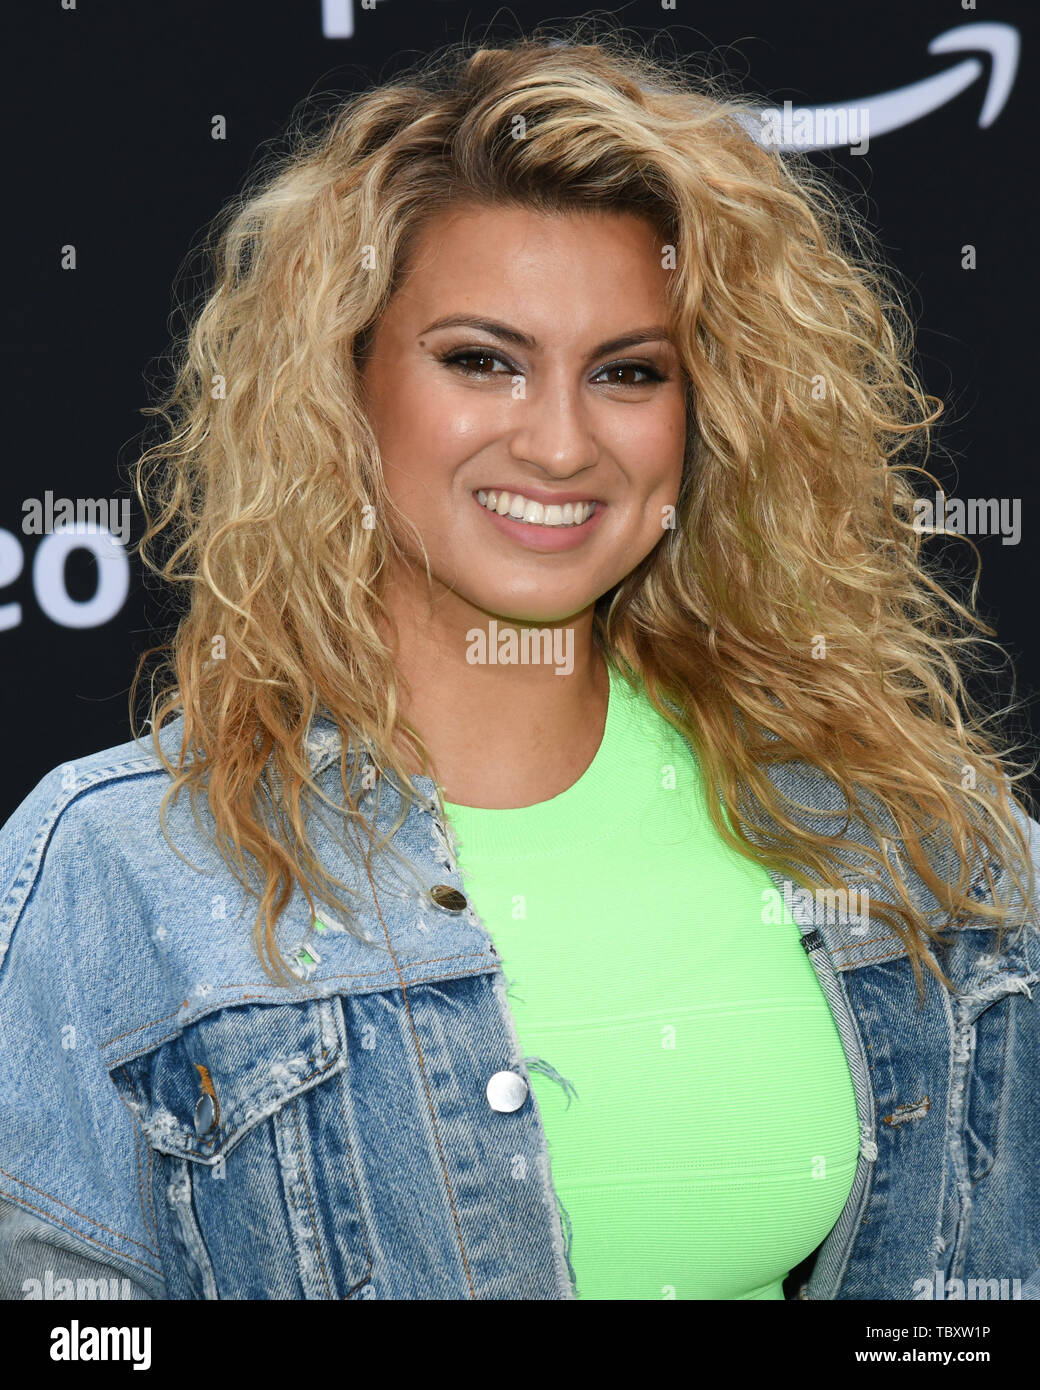 June 3, 2019 - Westwood, California, USA - 02, June 2019 - Westwood Village, California. Tori Kelly attends Premiere Of Amazon Prime Video's 'Chasing Happiness' at the Regency Village Bruin Theatre. (Credit Image: © Billy Bennight/ZUMA Wire) Stock Photo